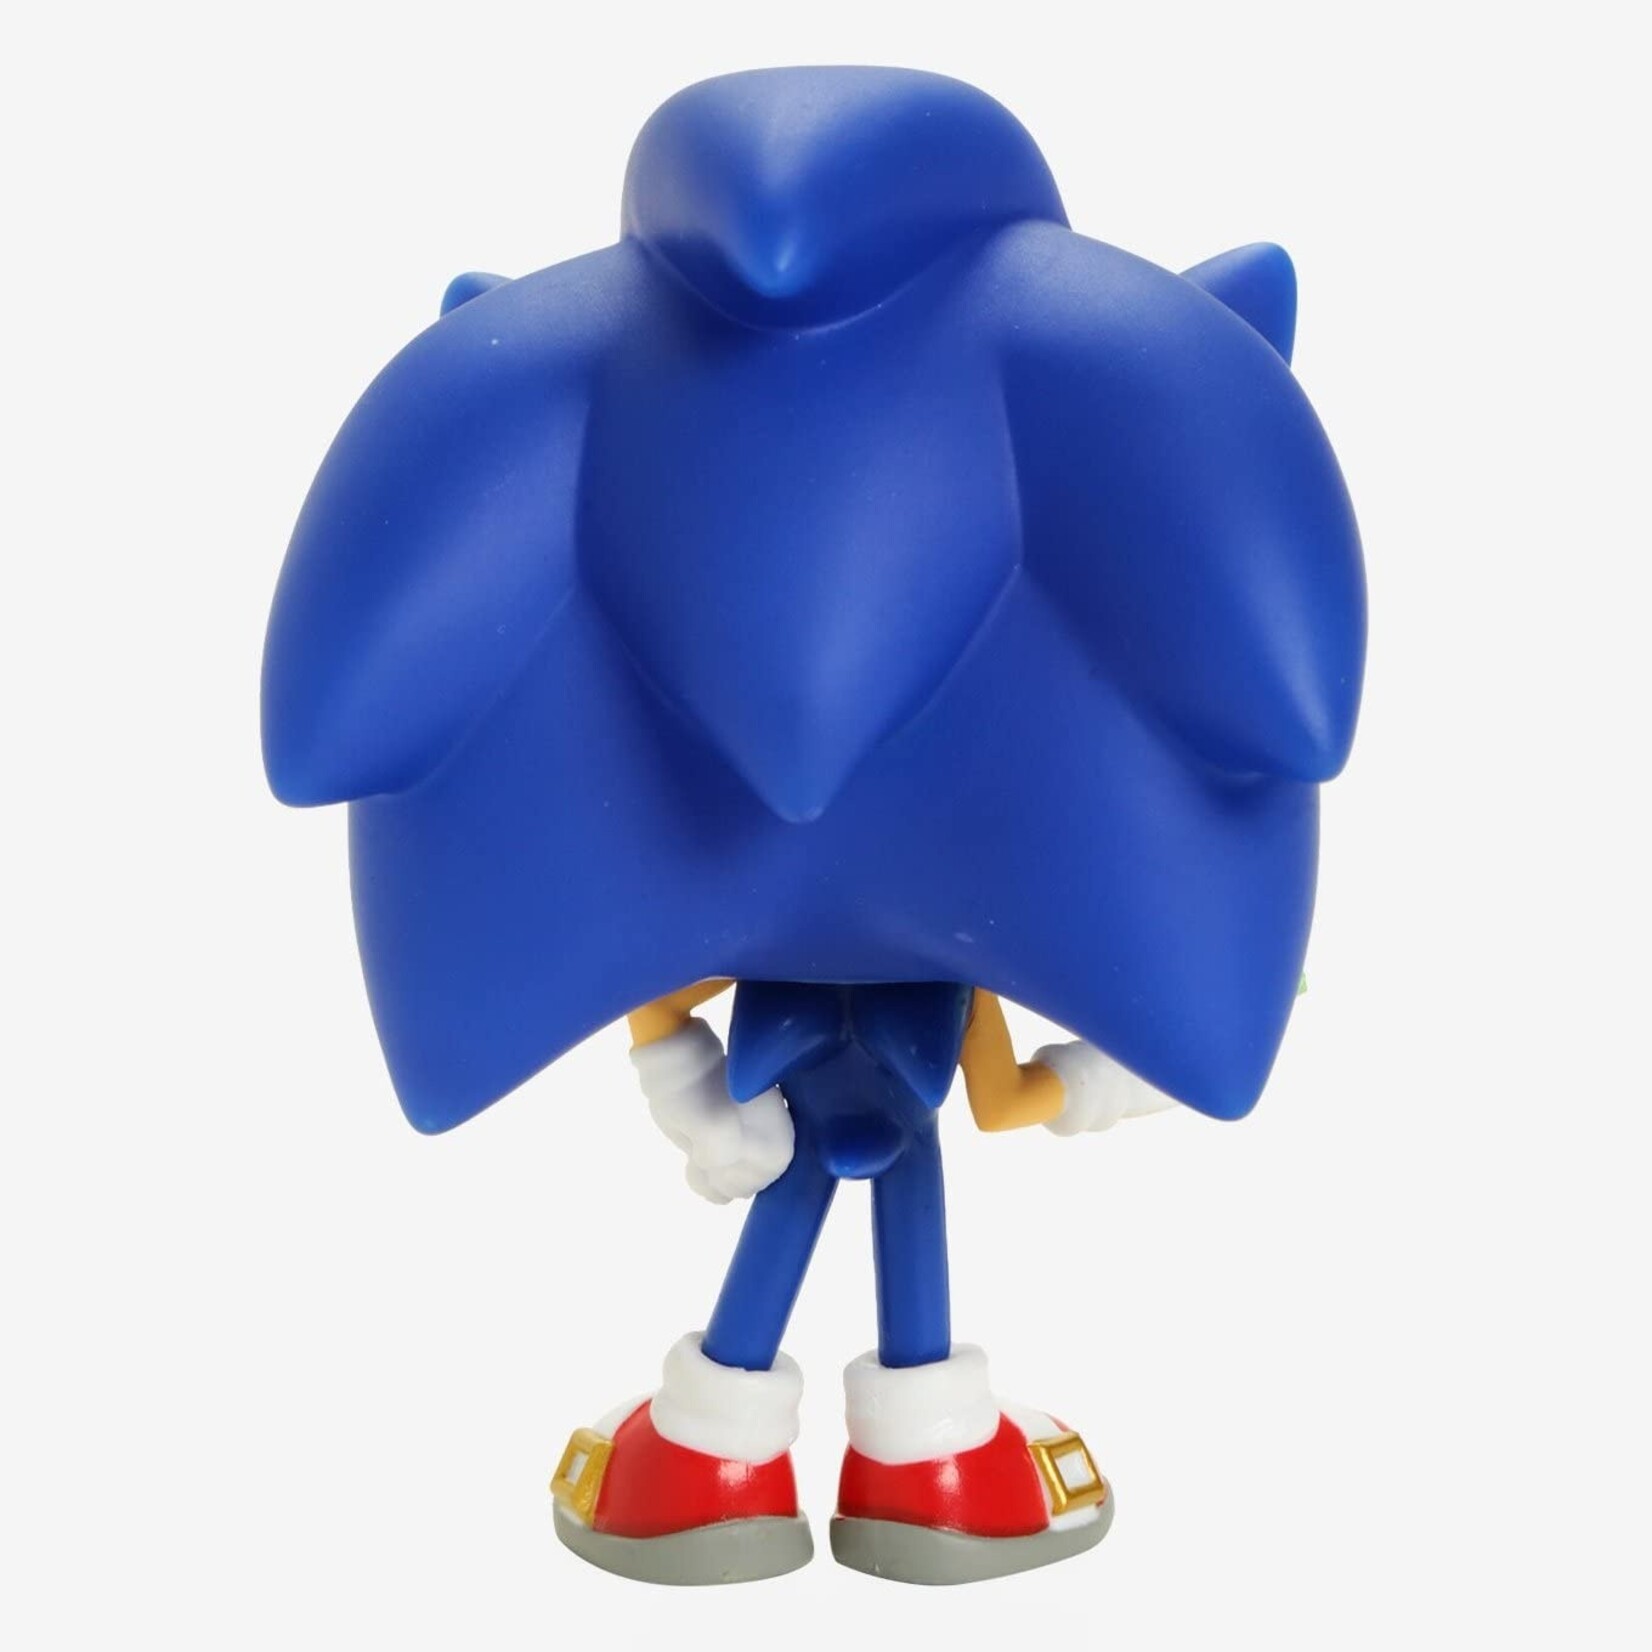 Funko Pop! Games - Sonic The Hedgehog - Sonic with Emerald